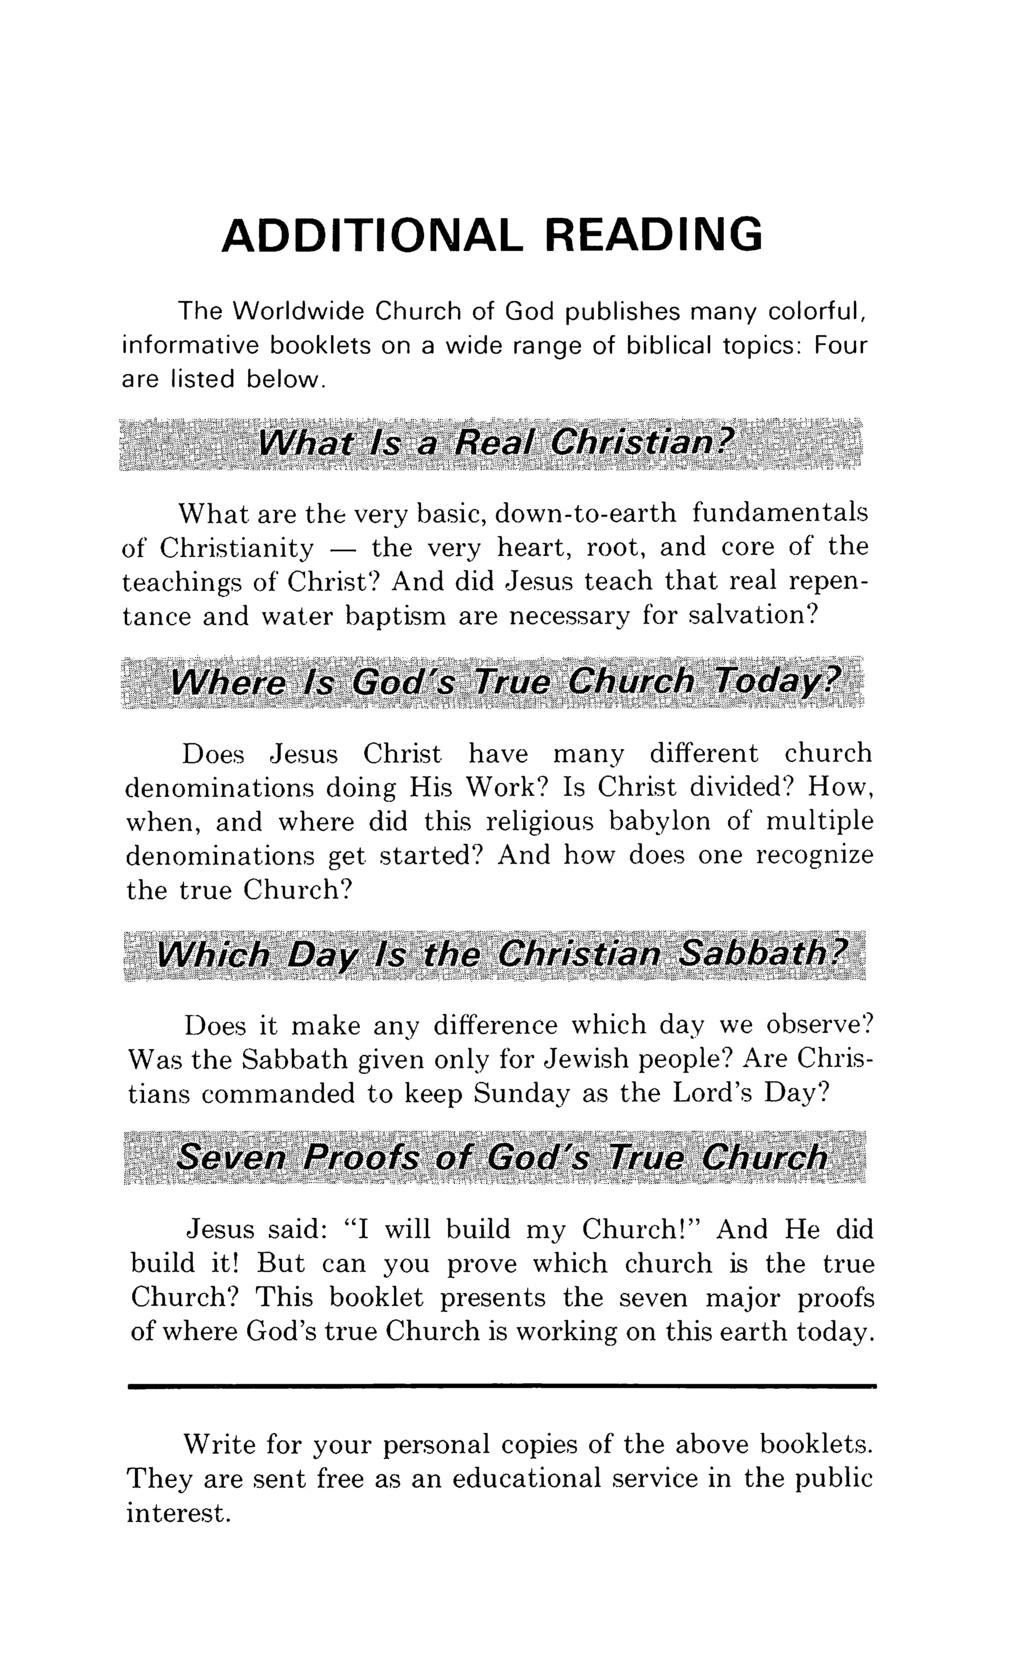 ADDITIONAL READING The Worldwide Church of God publishes many colorful, informative booklets on a wide range of biblical topics: Four are listed below.